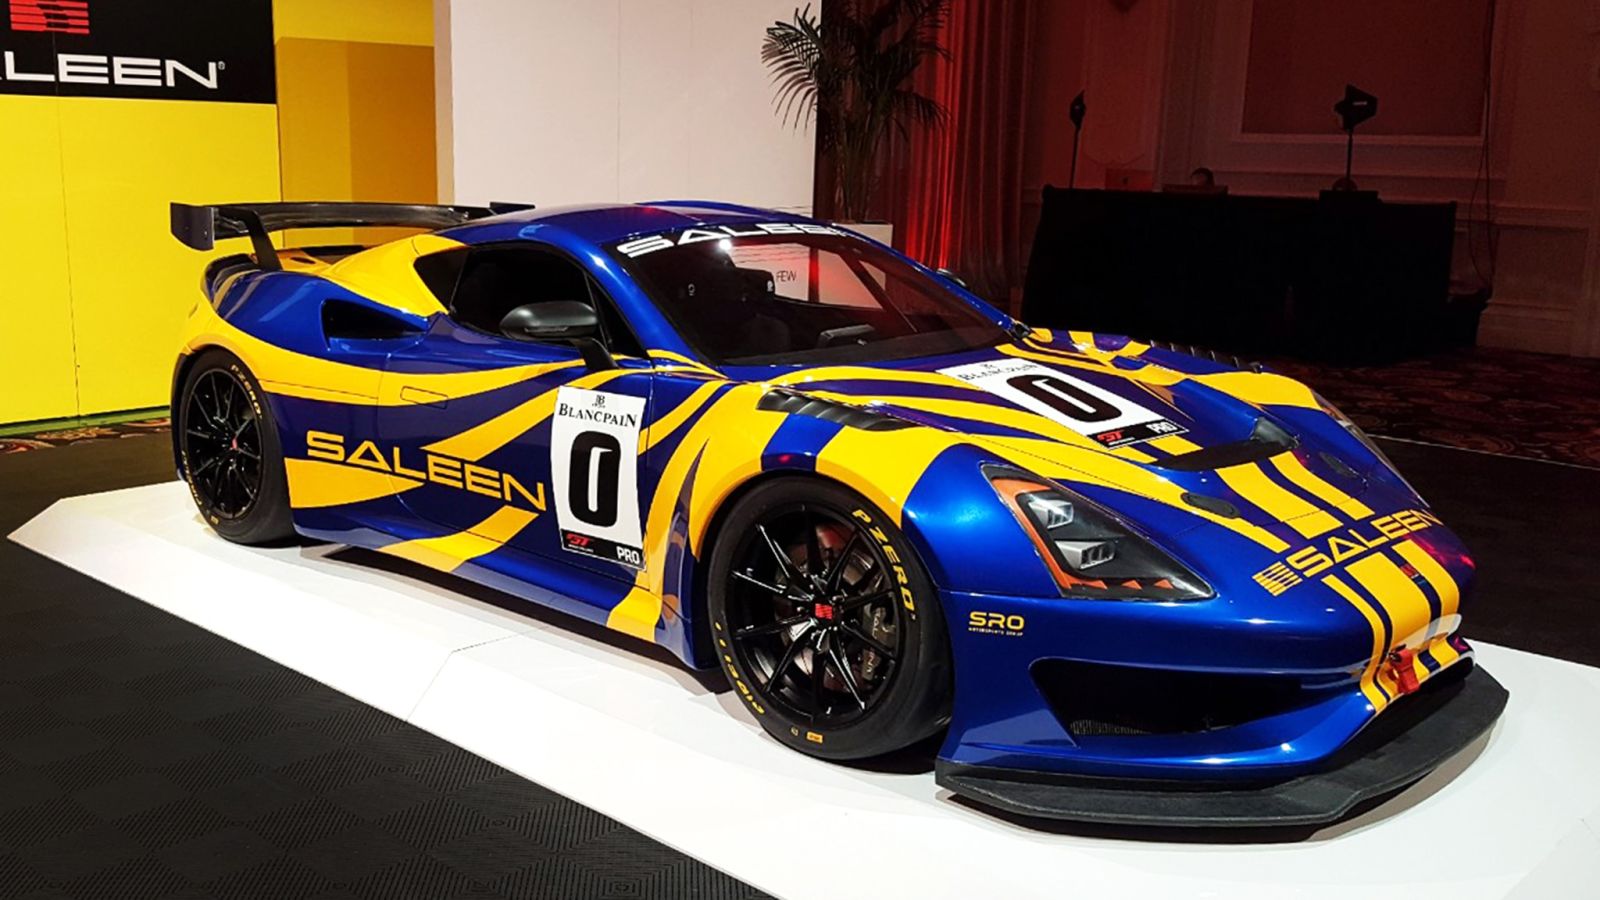 Illustration for article titled Saleen Unveils New GT4 Car